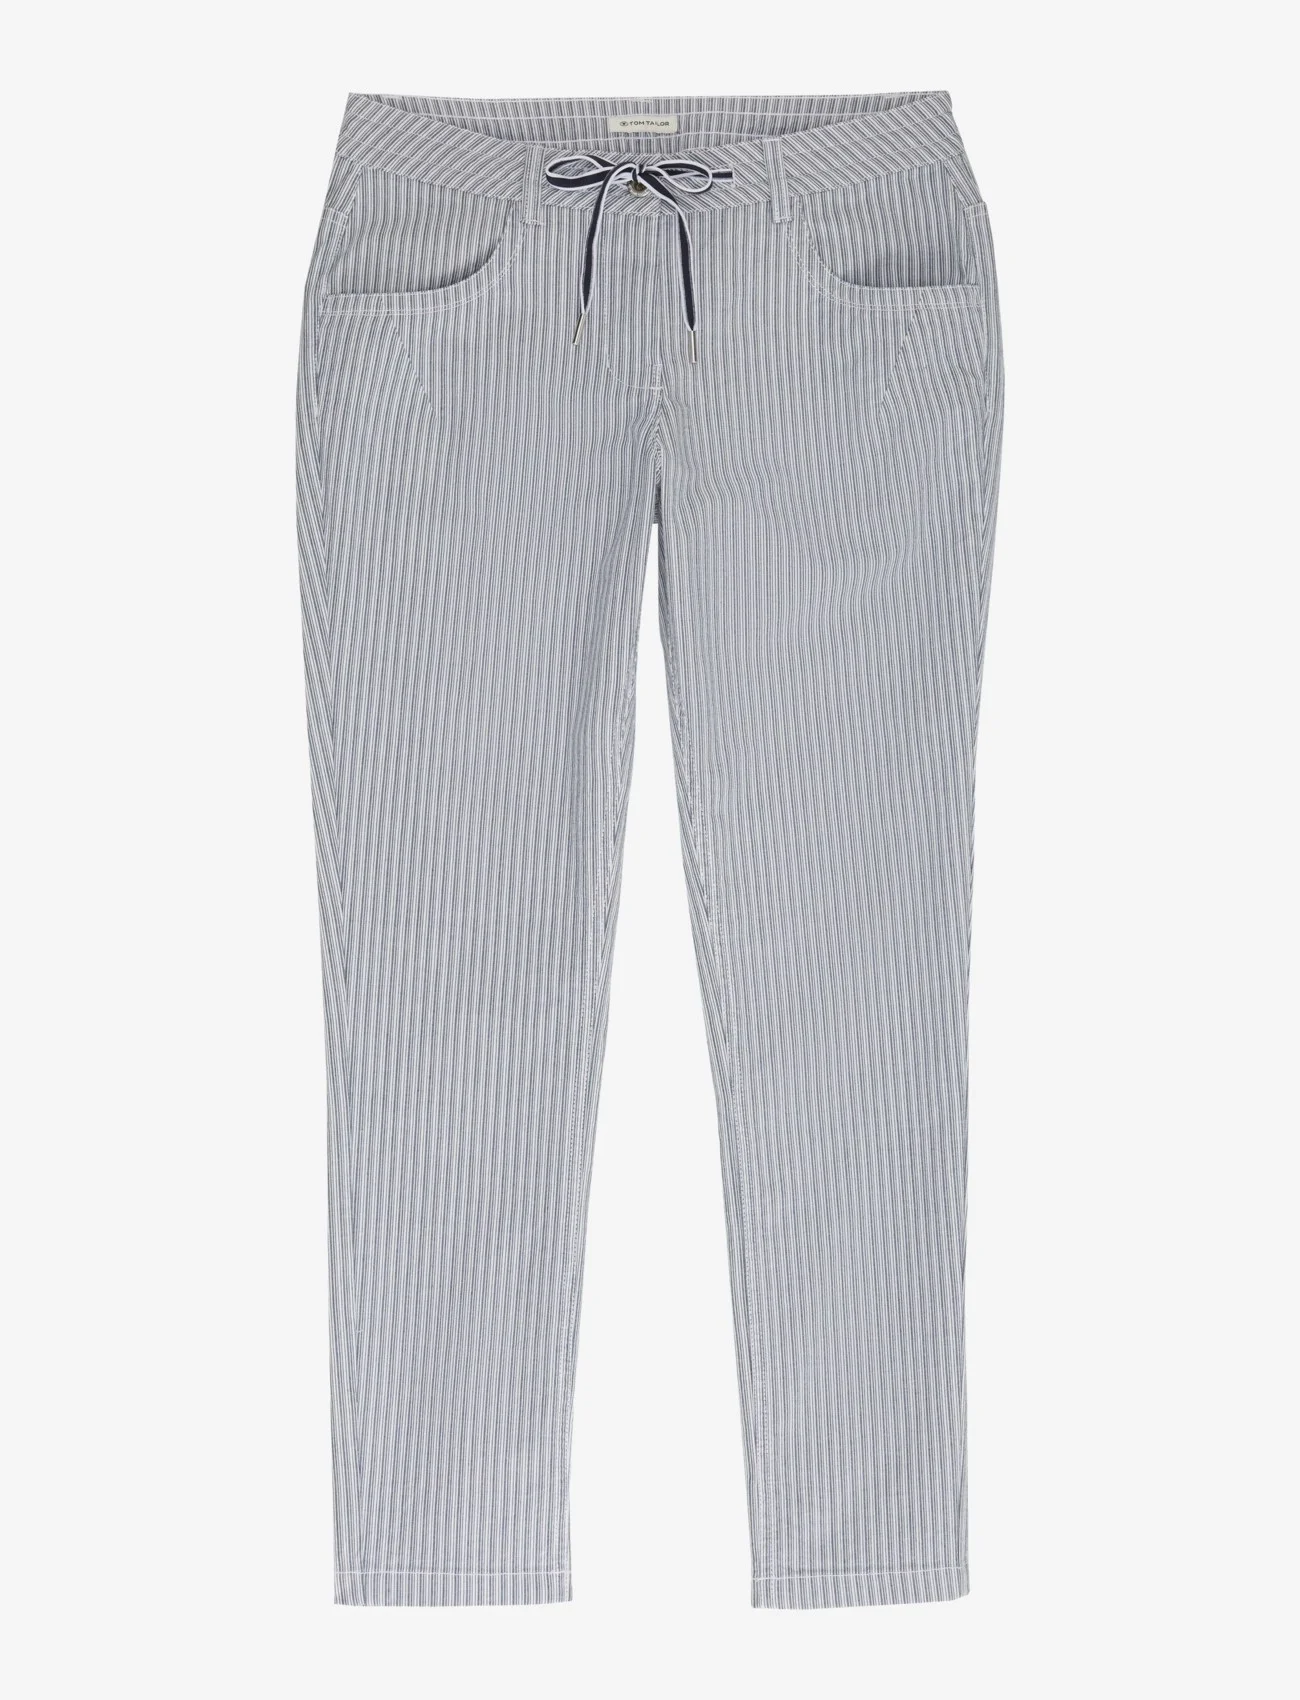 Tom Tailor - Tom Tailor Tapered relaxed - suorat housut - navy stripe - 0